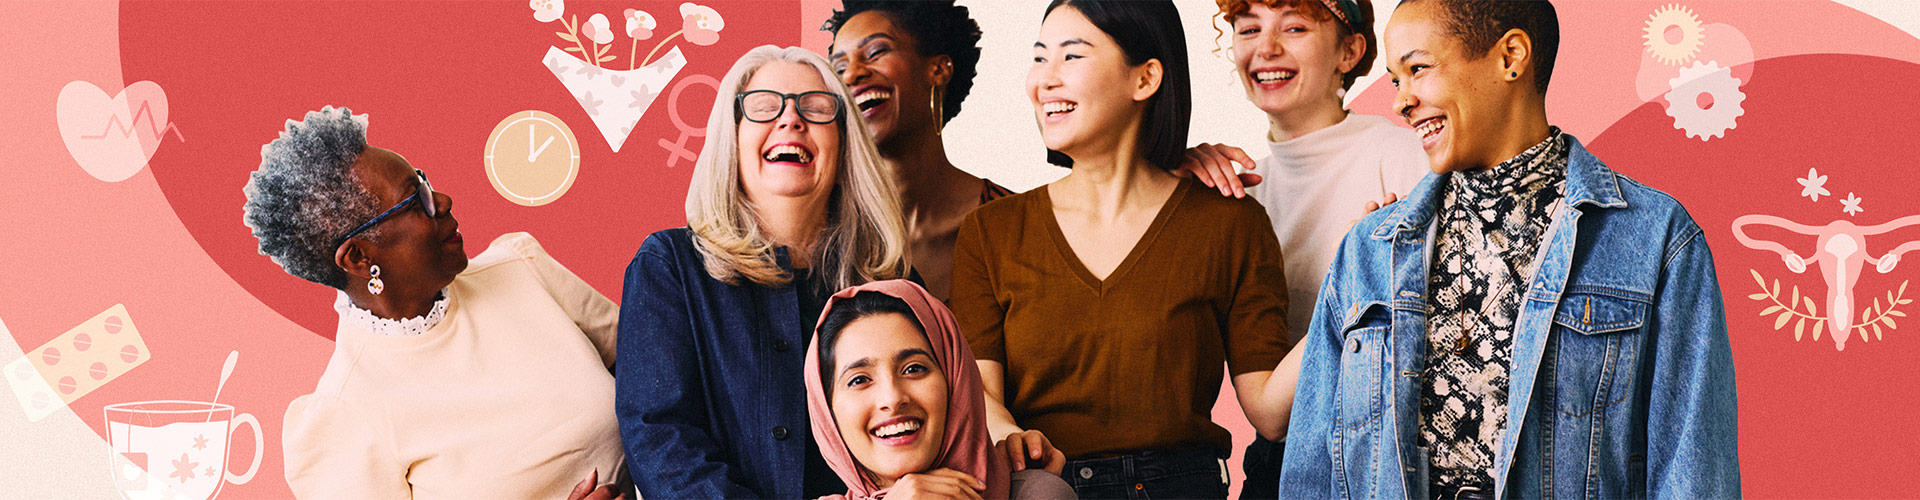 Women's Health Retail Safari Banner featuring diverse group of smiling women with feminine wellness icons over a pink background